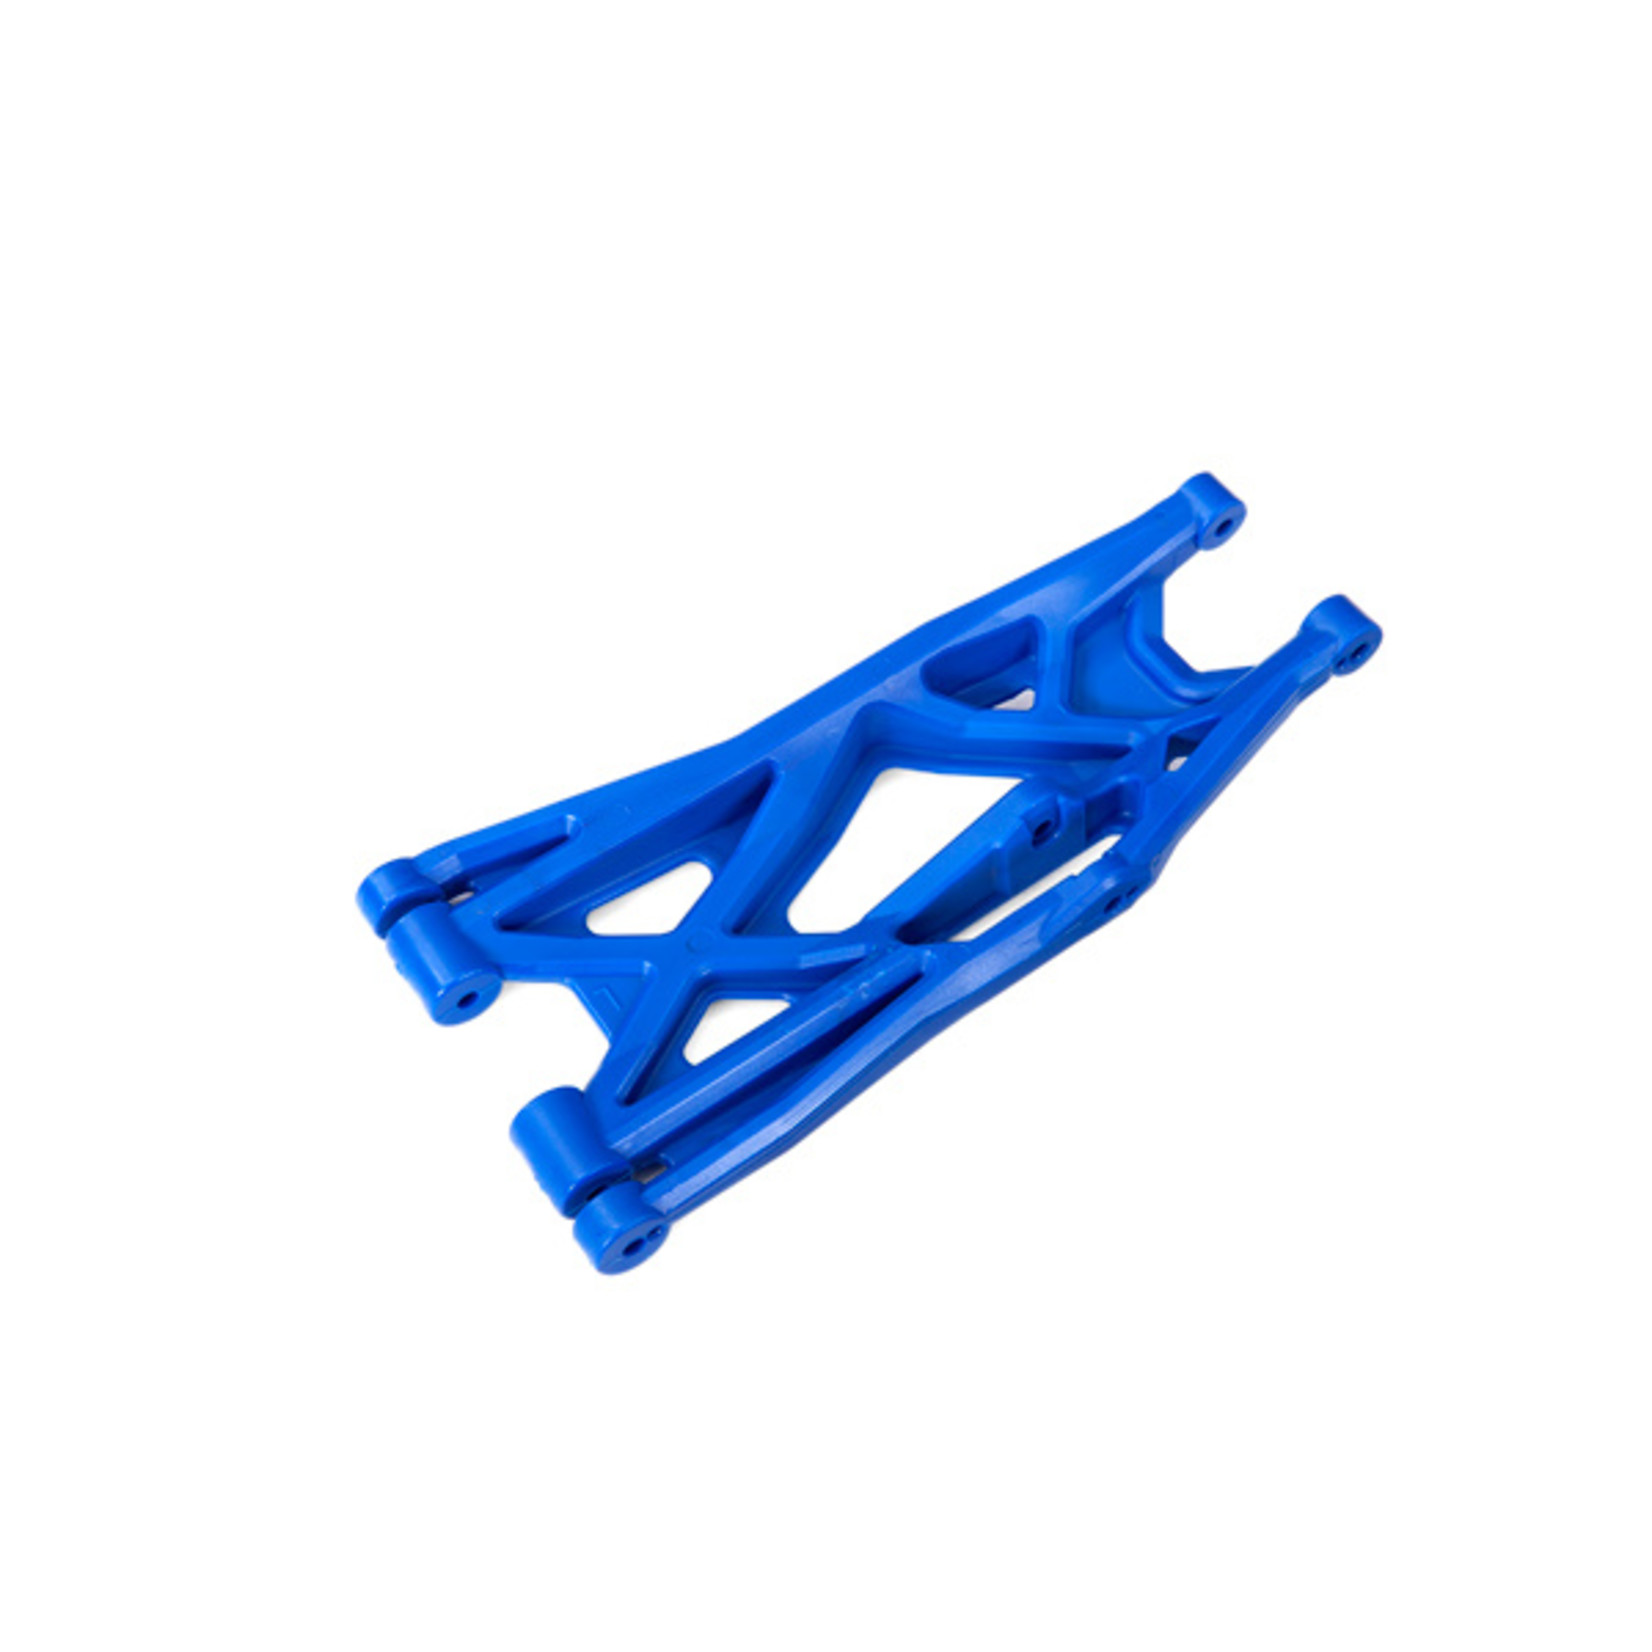 Traxxas 7831X - Suspension arm, blue, lower (left, front o